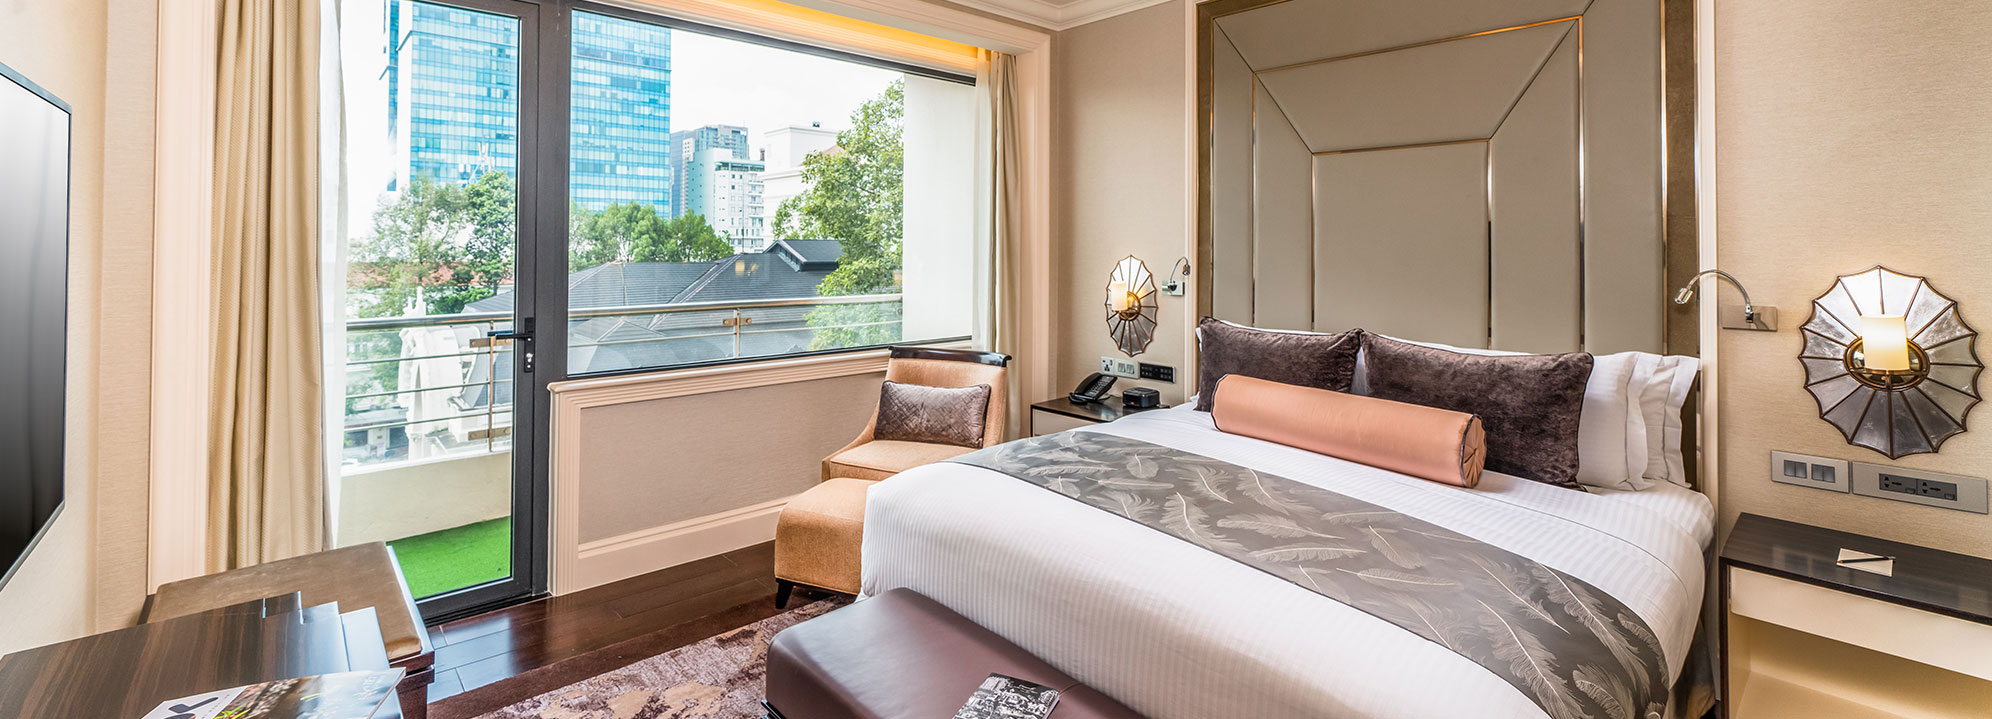 The Opera View Suite at Caravelle 5 Star Hotel Saigon, Vietnam